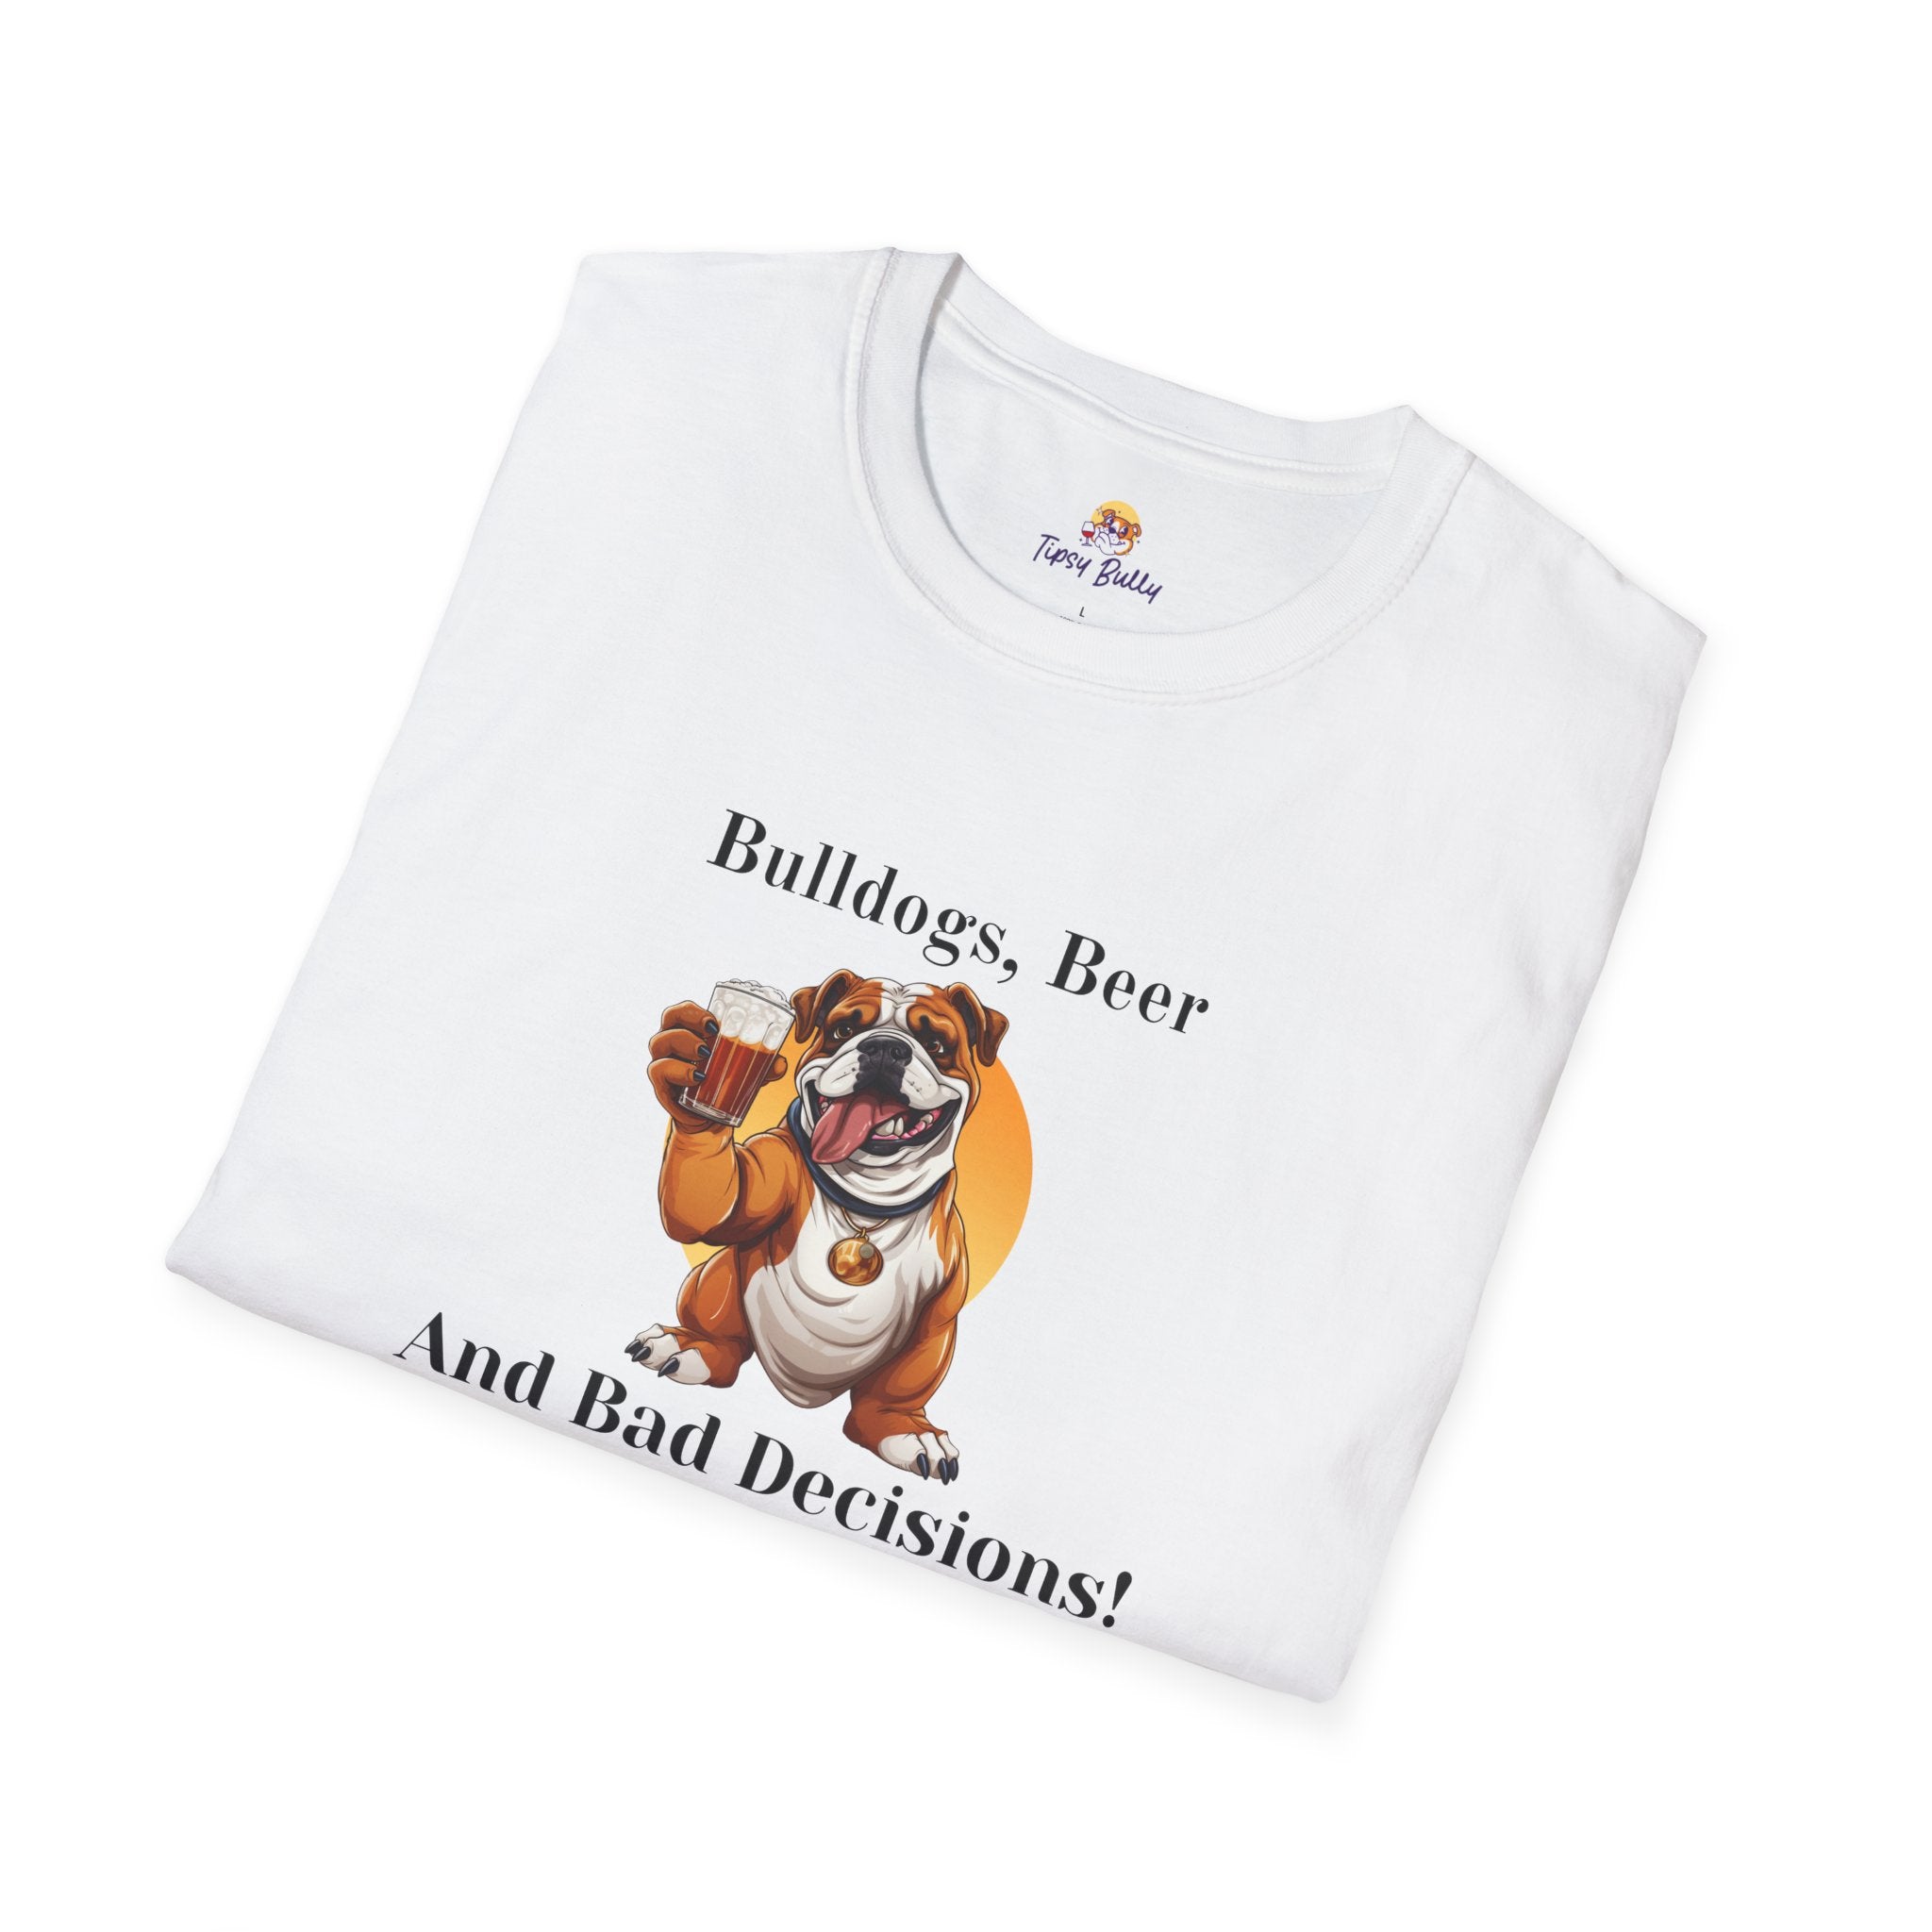 Bulldogs, Beer, and Bad Decisions" Unisex T-Shirt by Tipsy Bully (English/Brown)